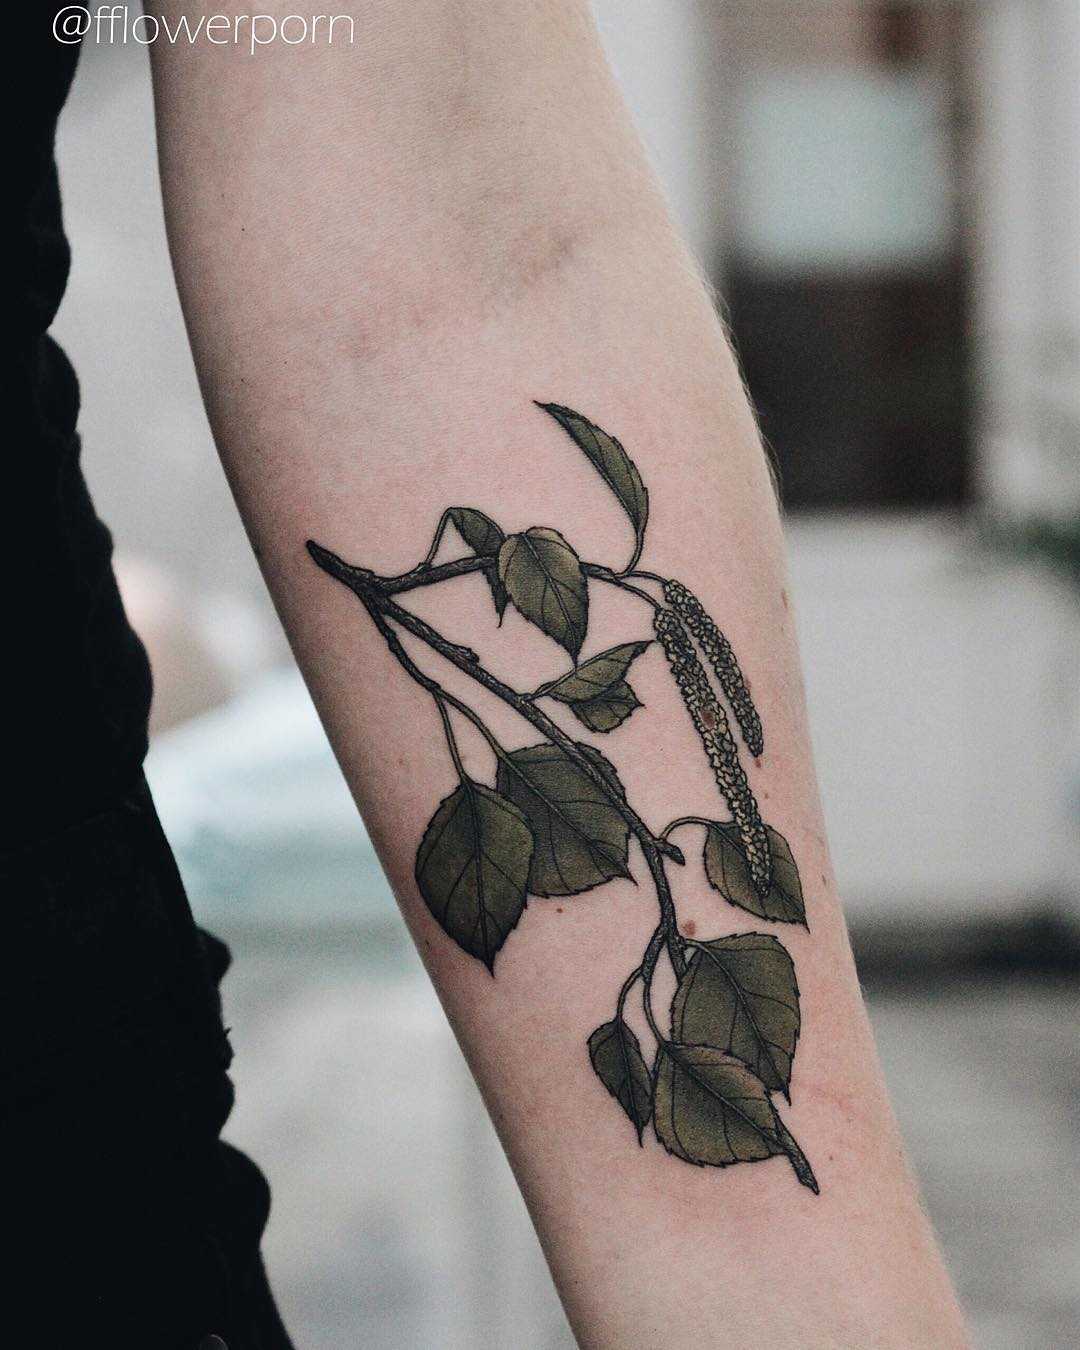 Birch branch tattoo on the forearm